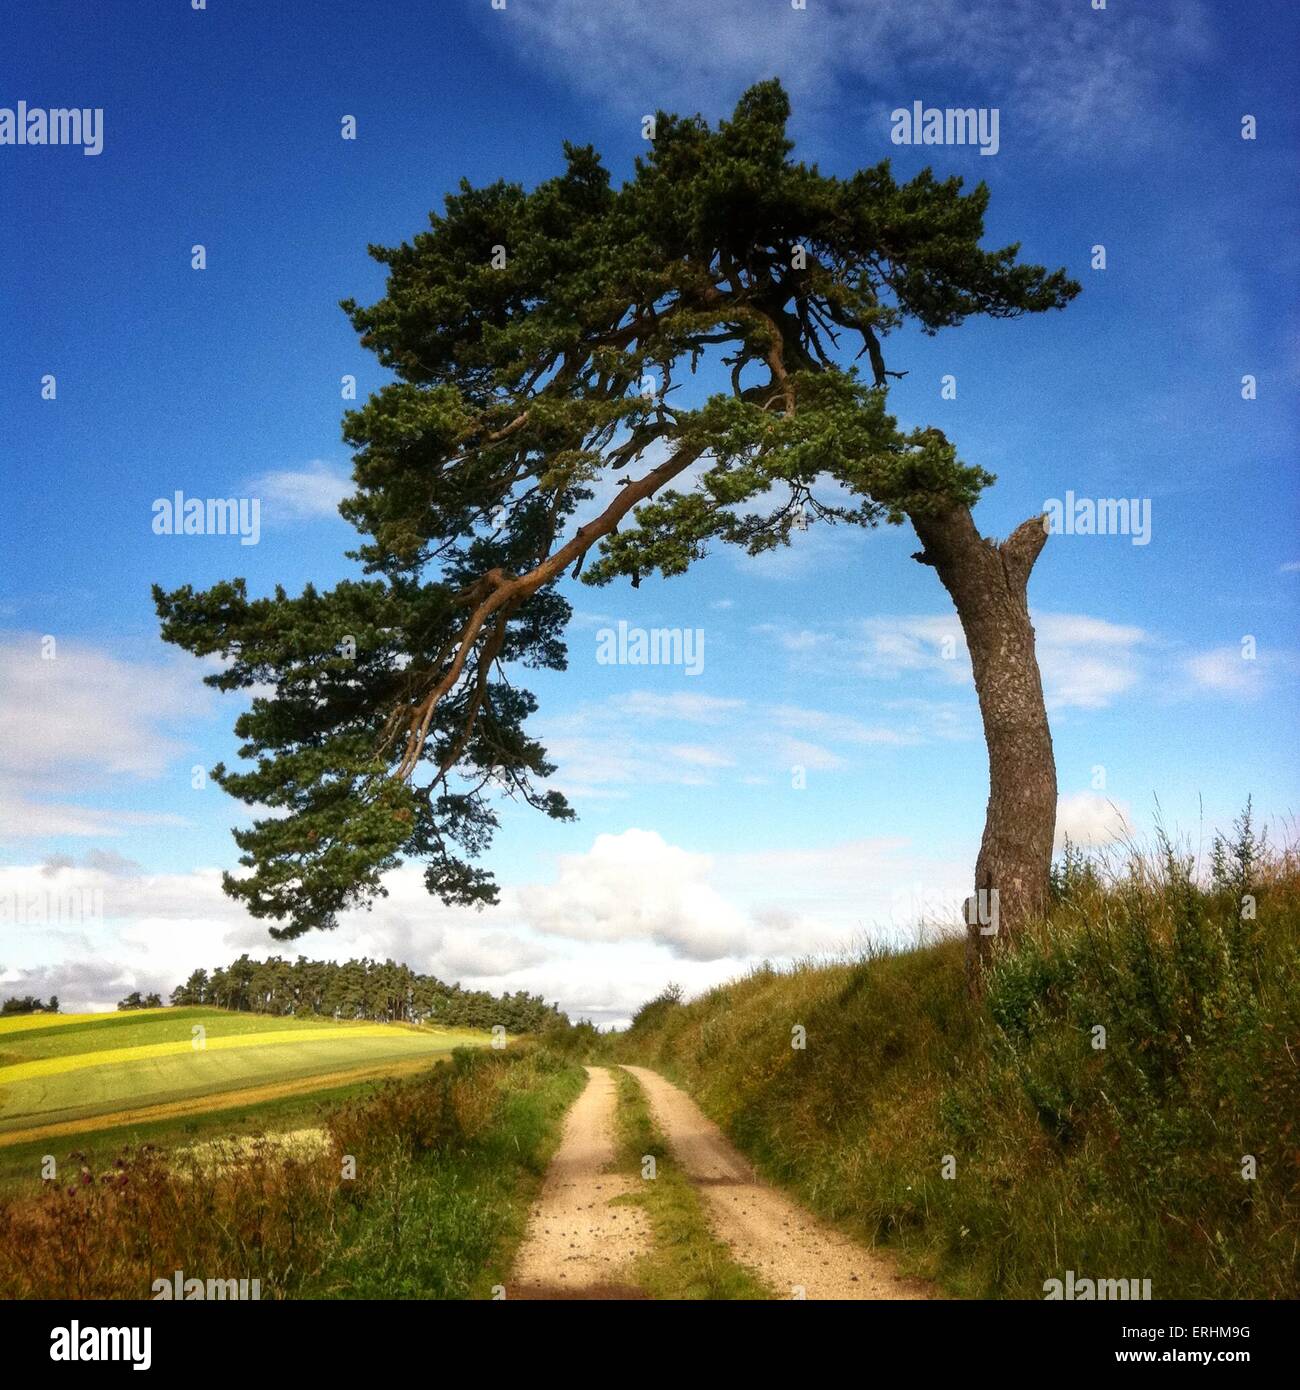 Large tree leaning over a road, Le Puy-en-Velay, France Stock Photo